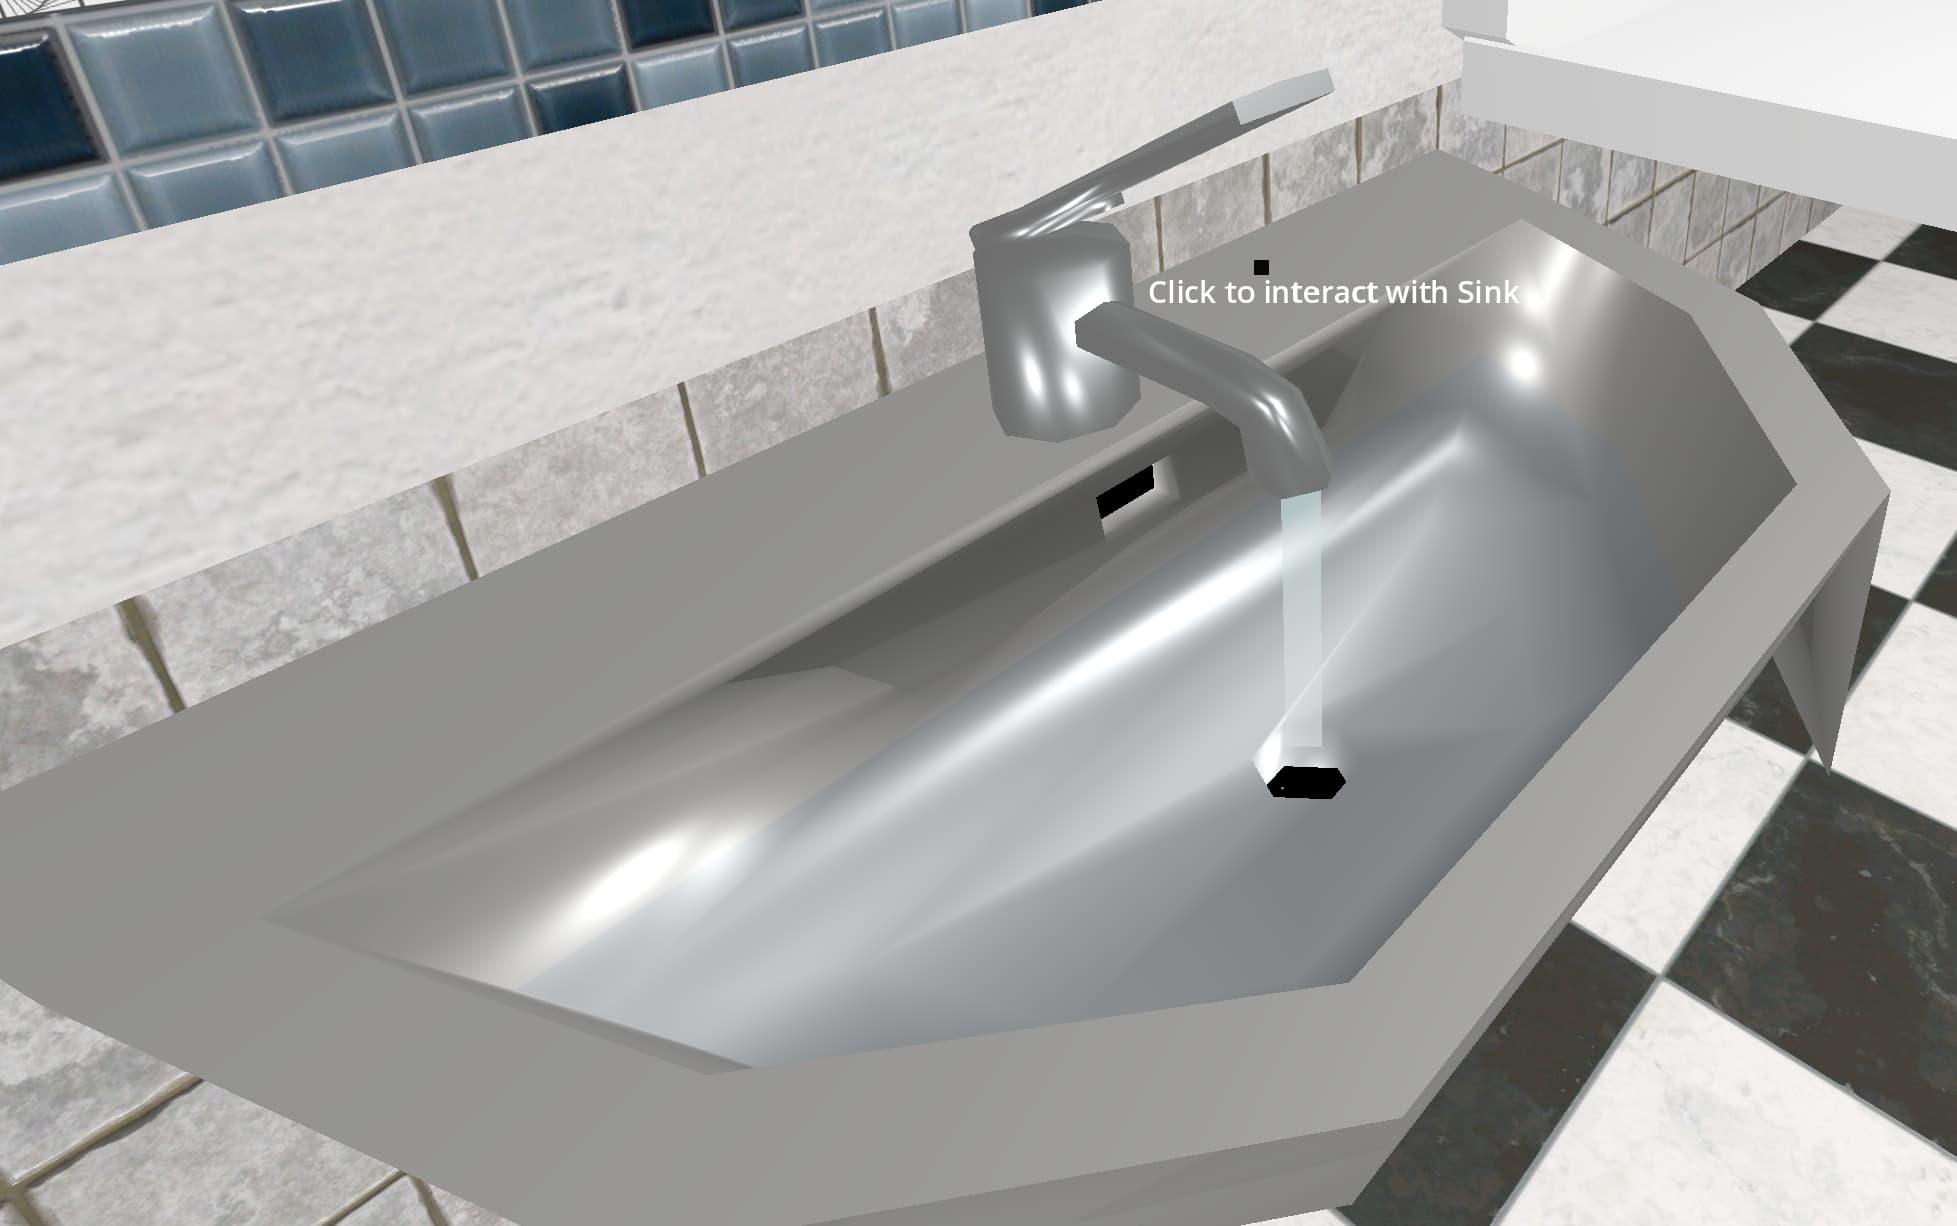 A 3D model of a sink, with its tap up and water coming out of the faucet